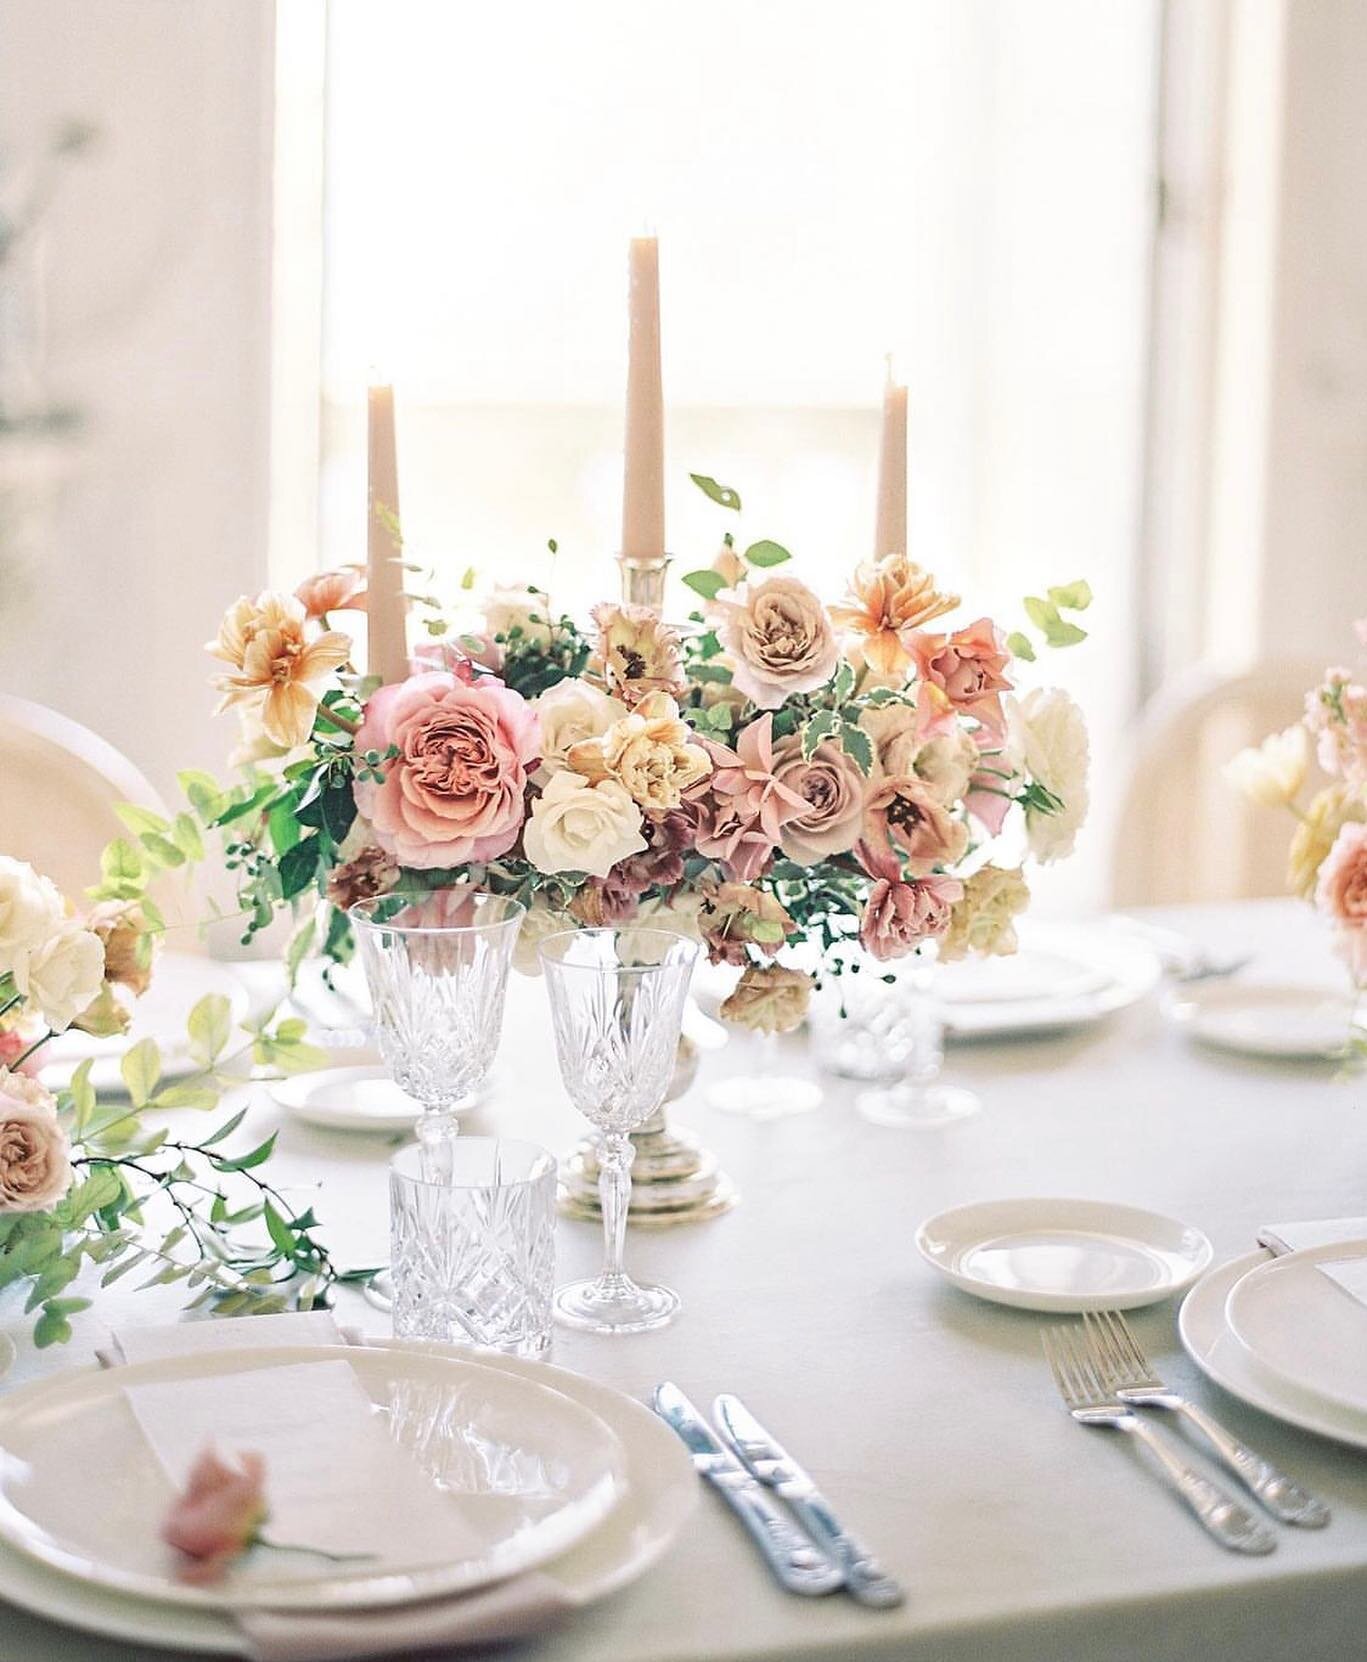 &ldquo;Elegance is the only beauty that never fades&rdquo;.
-Audrey Hepburn

I remember seeing floral candelabras like these on my feed and I was so mesmerized how airy and romantic they felt. When @floraisonparis told me the brief of what we were go